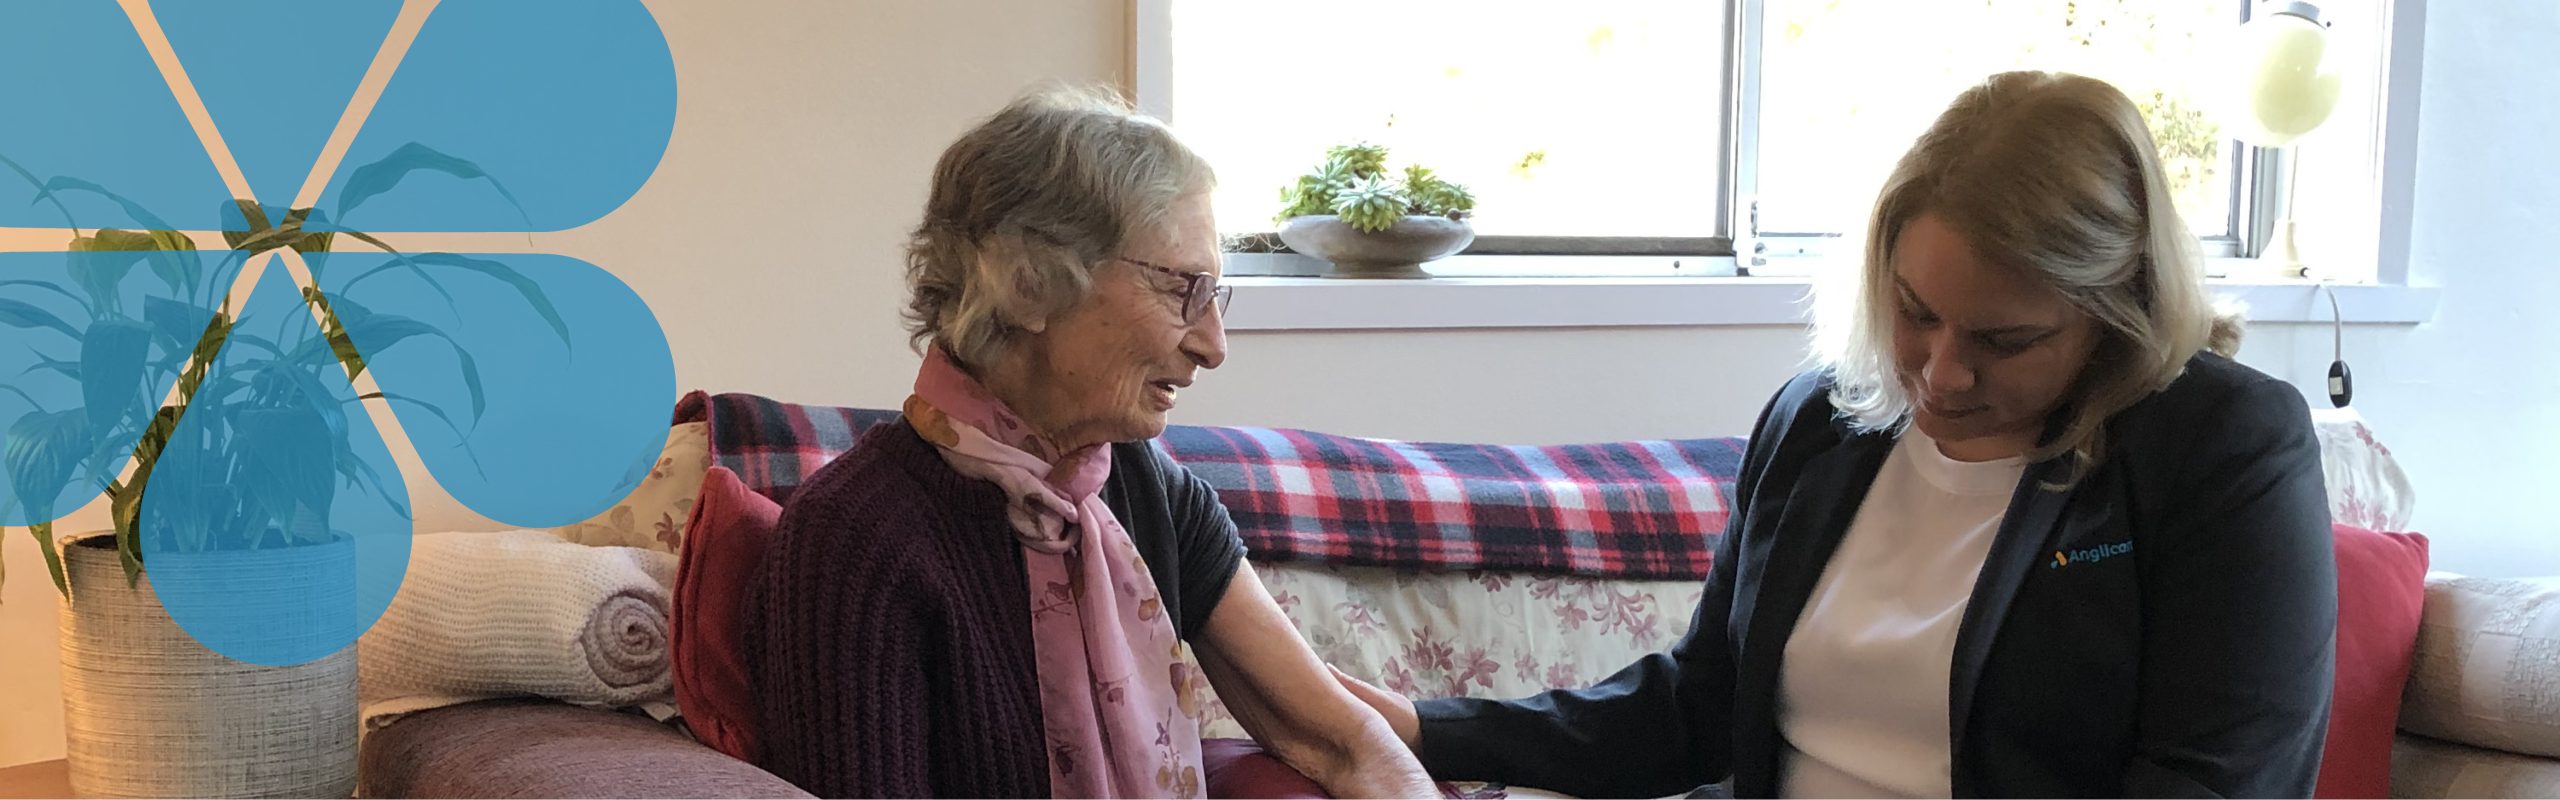 Image of an Anglicare Home Care Team Member with a client sitting on the couch. Appears to be taking the clients blood pressure.